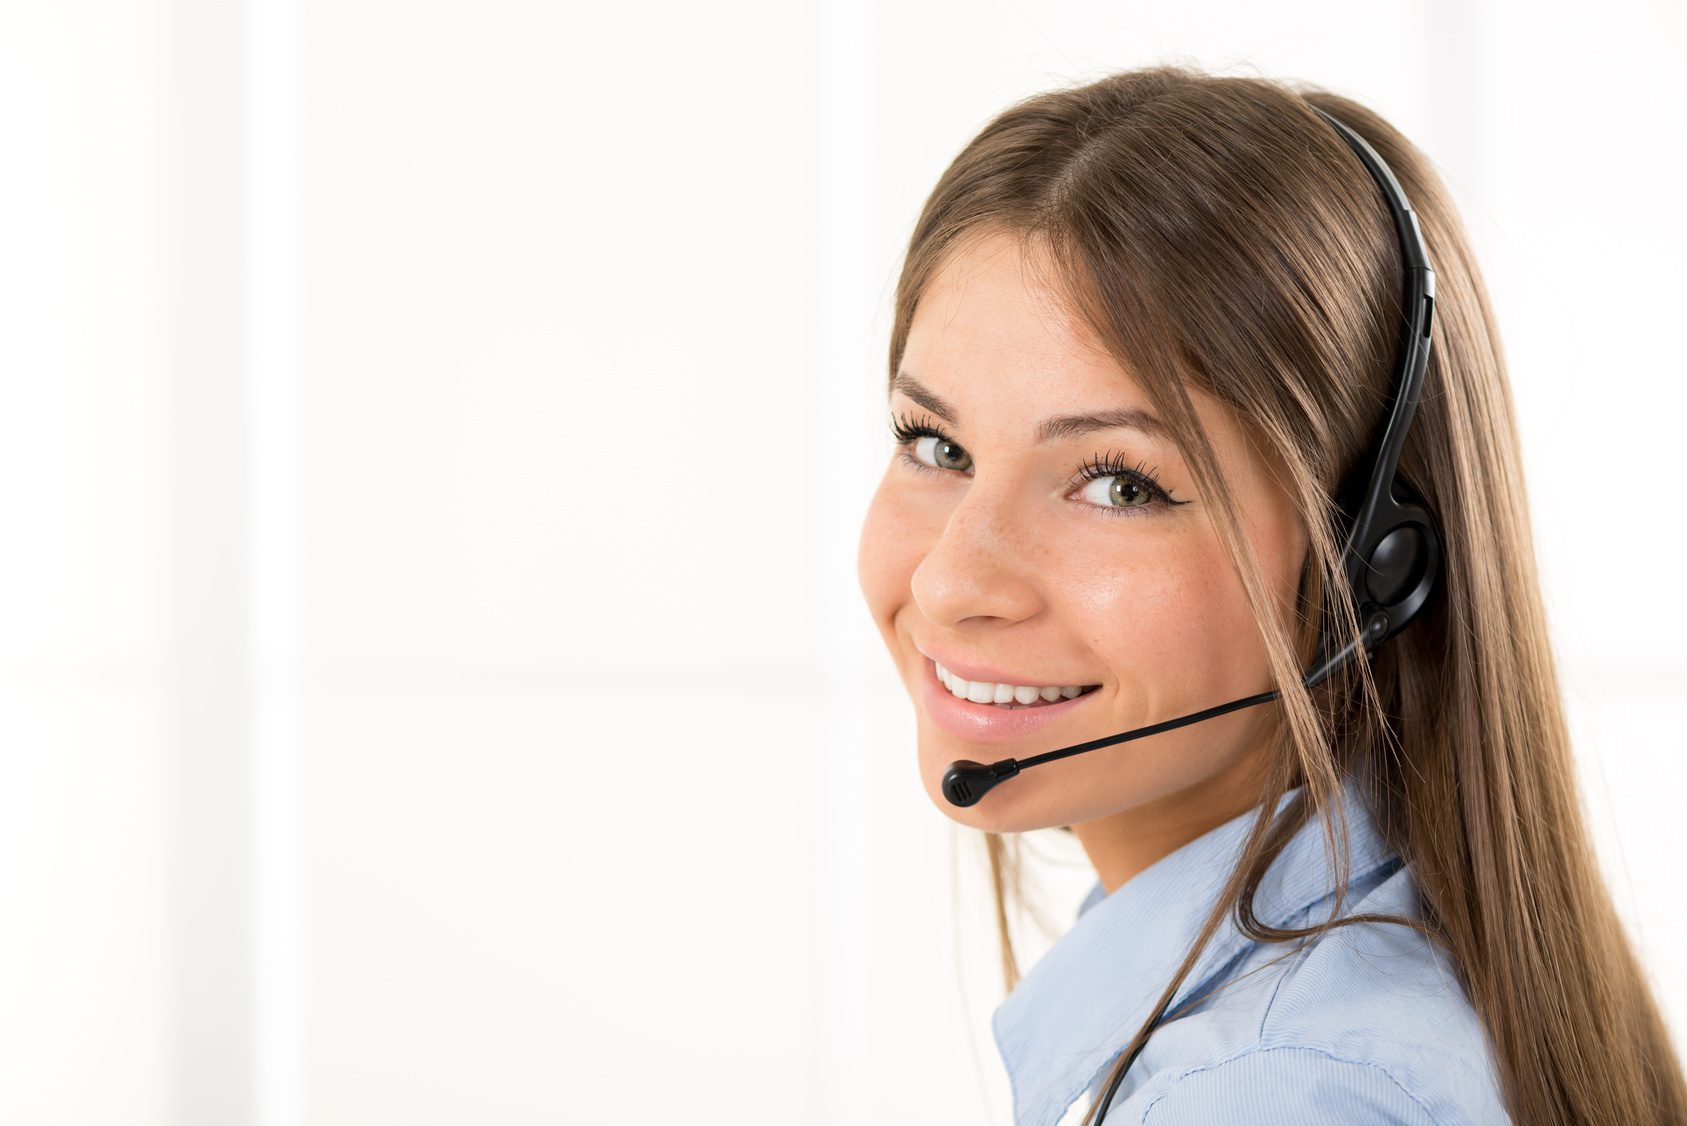 Young beautiful woman, call operator with headset smiling looking at the camera.